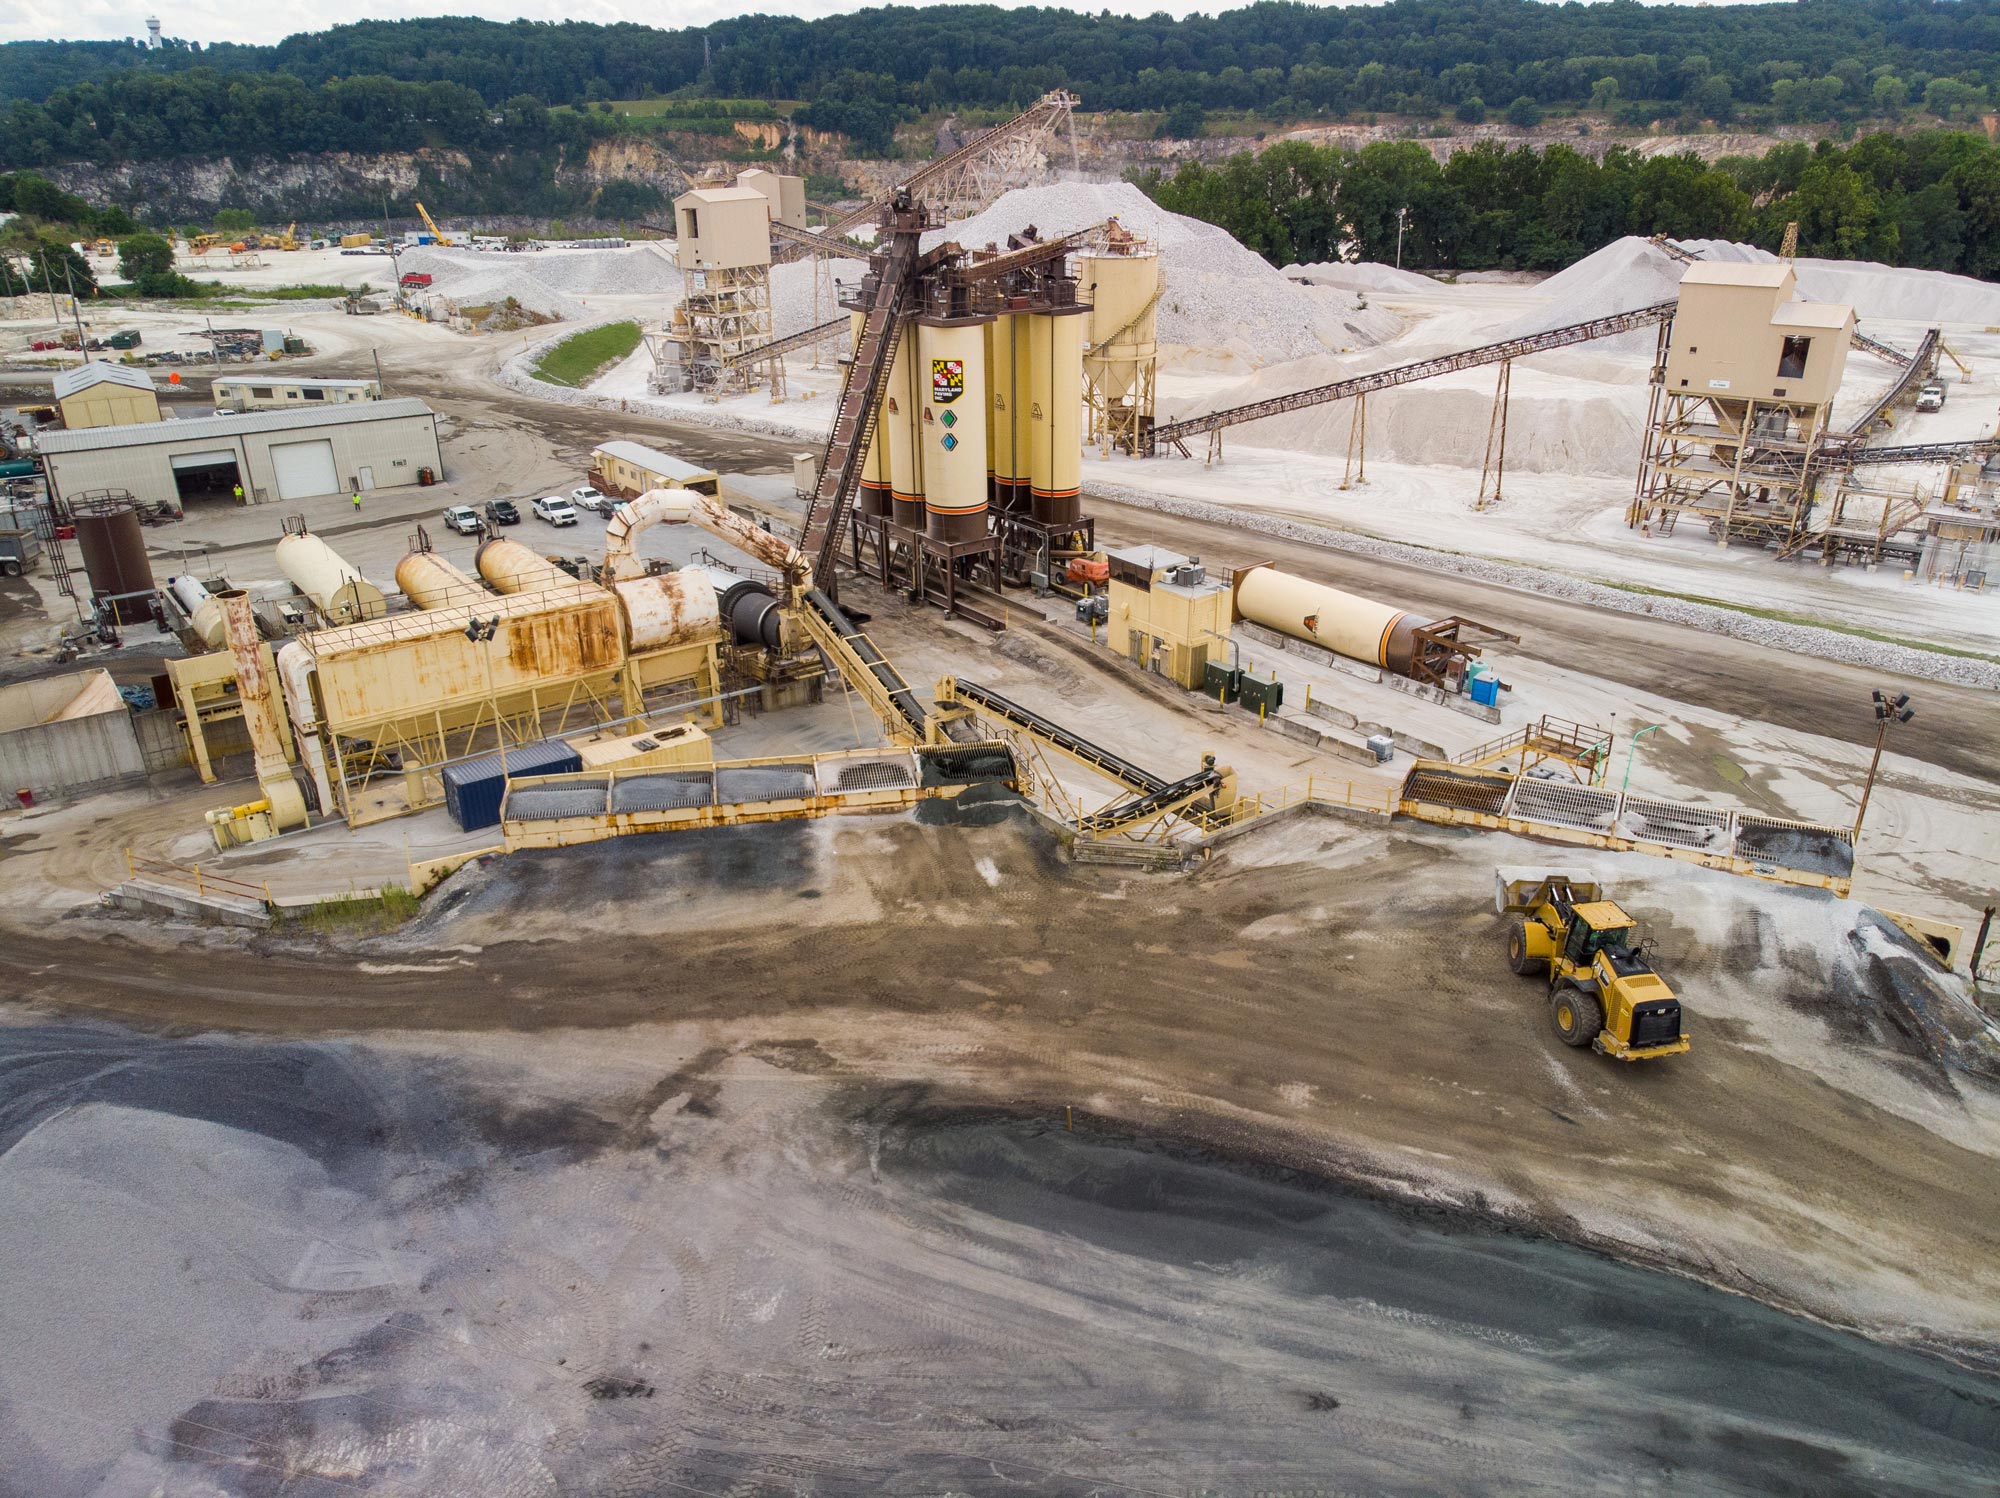 A wide view angle of a paving plant located in maryland, owned and operated by Gray & Son a leading site and development contractor in Maryland.